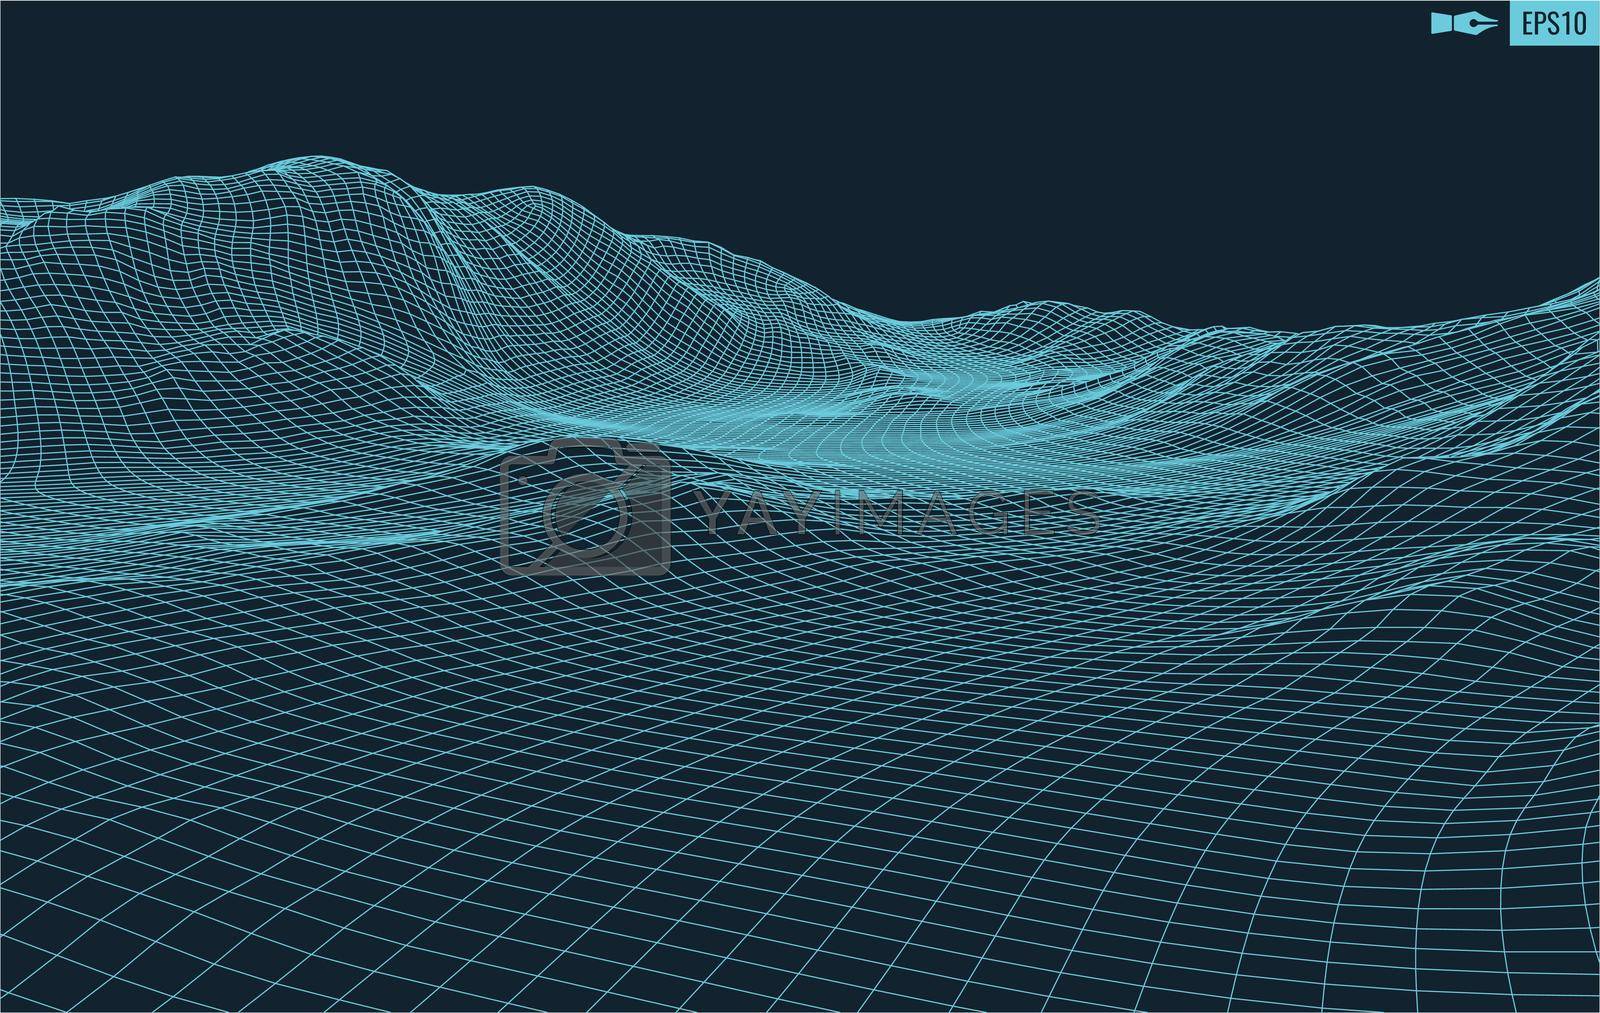 Royalty free image of Abstract vector landscape background. Cyberspace grid. 3d technology illustration. by DmytroRazinkov